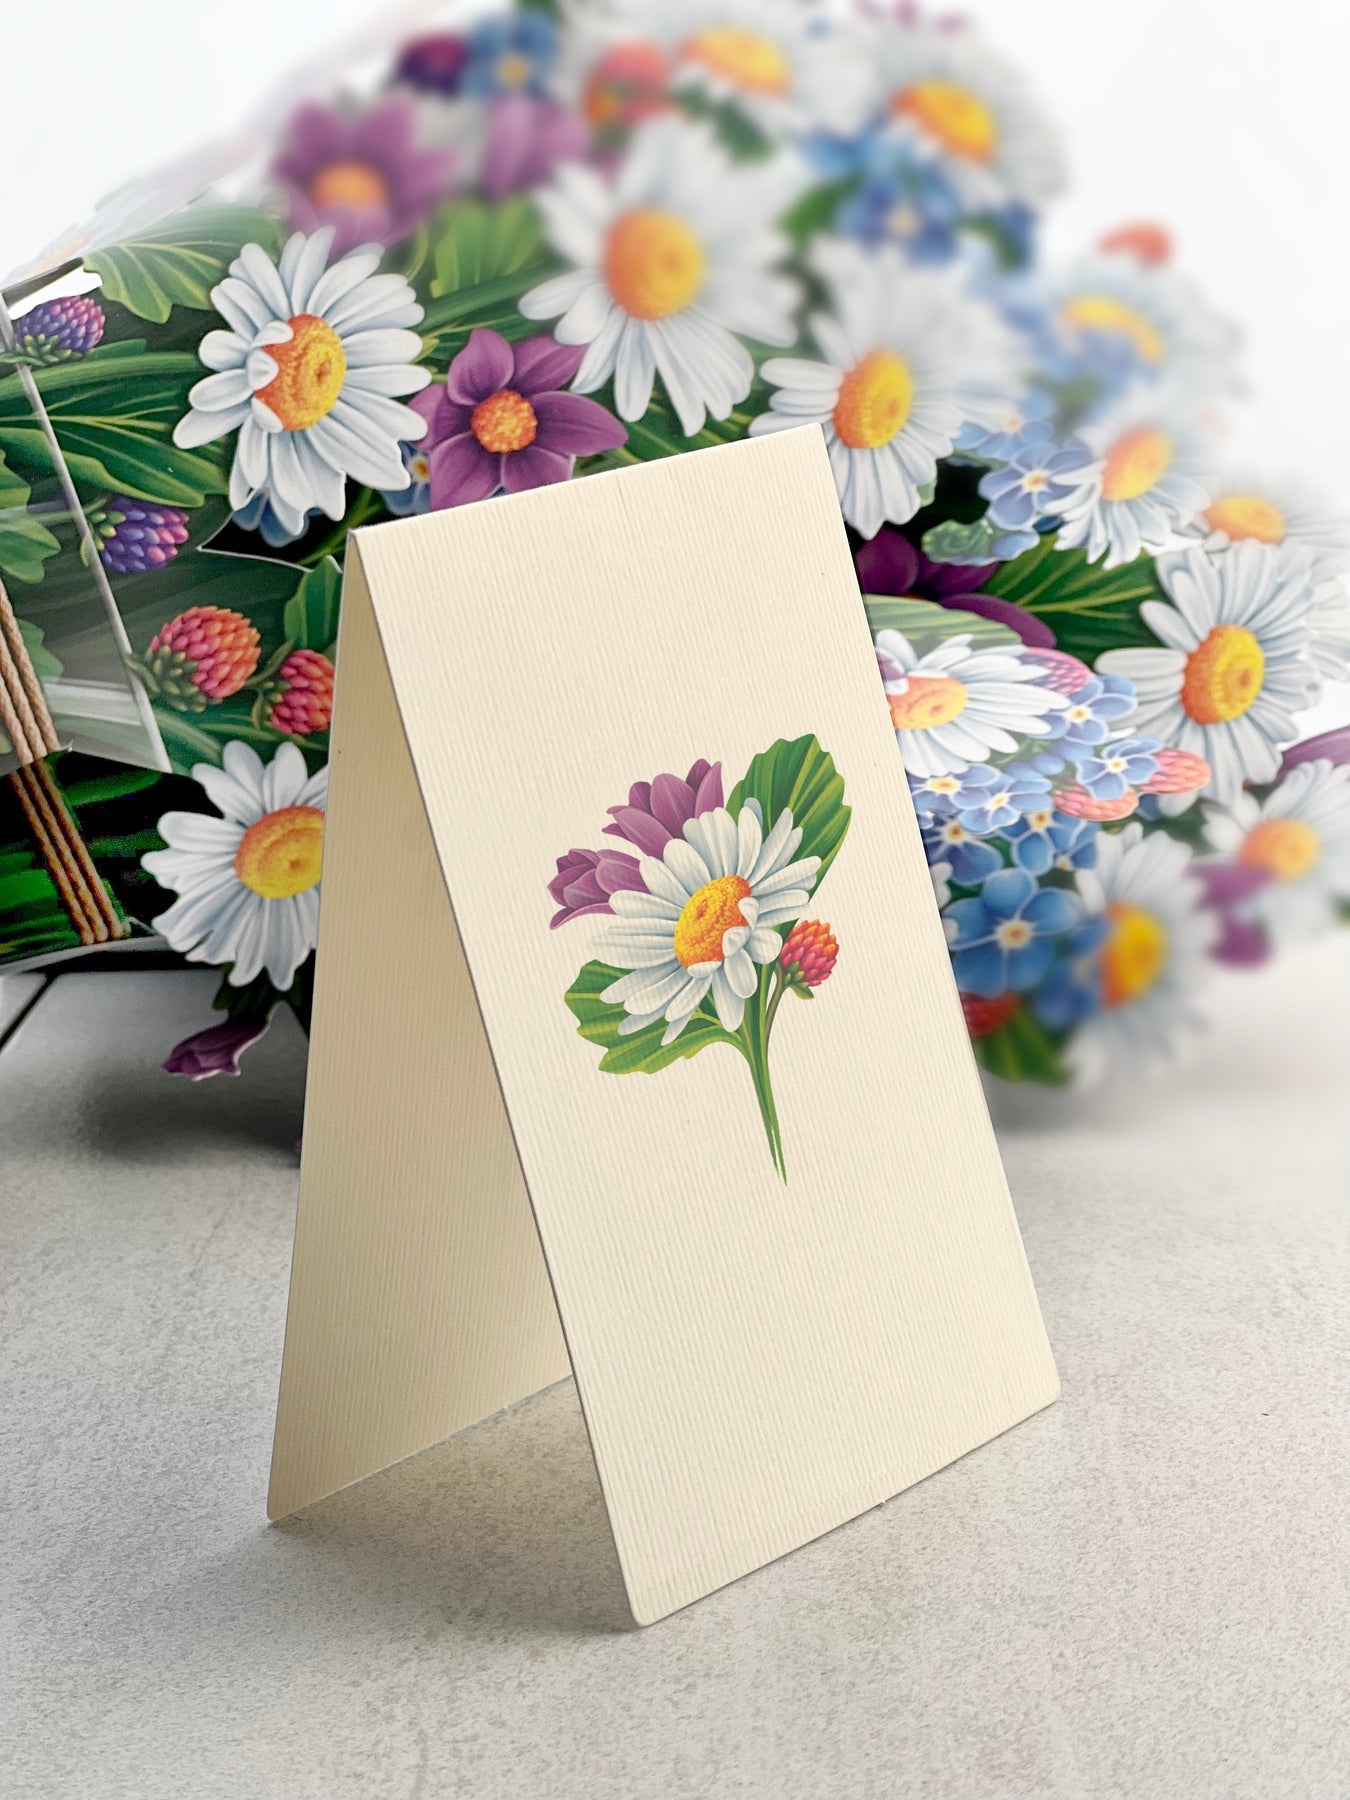 Pop Up Flower Bouquet Greeting Card - Field of Daisies    